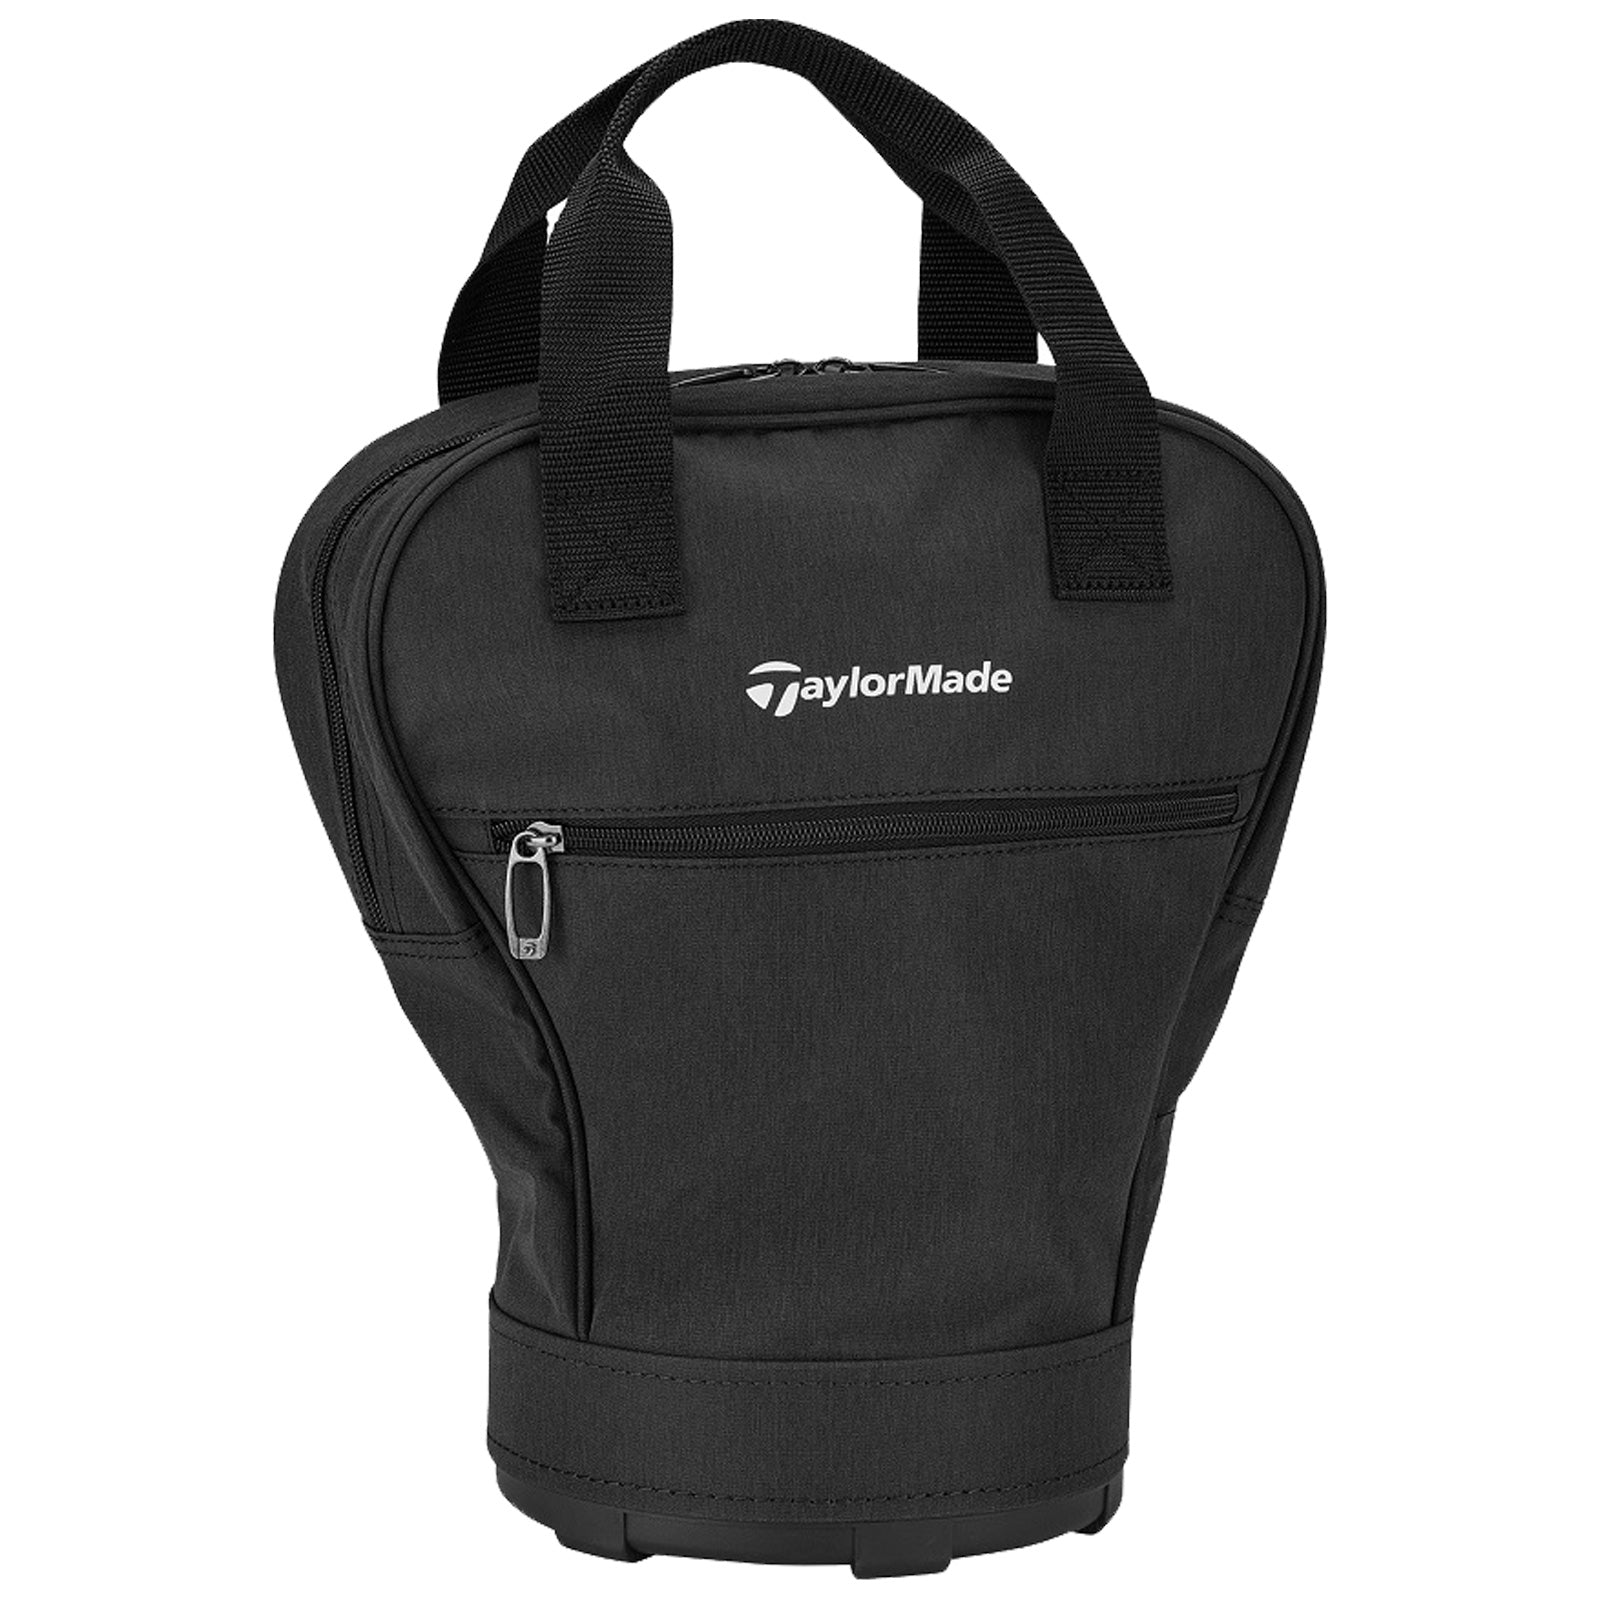 TaylorMade Performance Practice Ball Bag N8949601